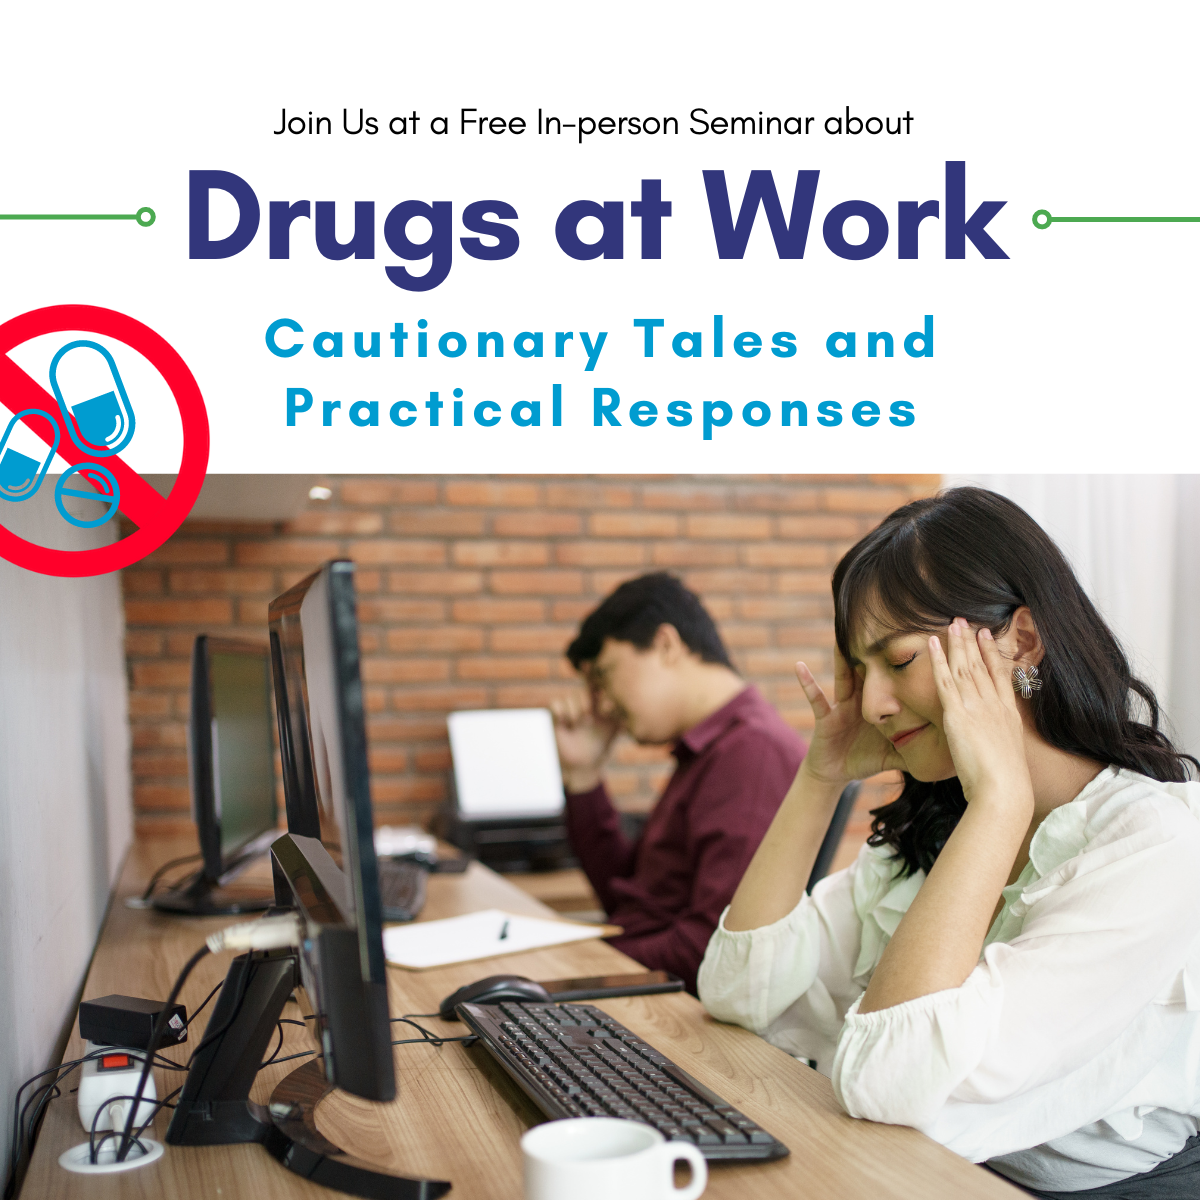 Image of woman holding her head between her hands and a male coworker sitting near her with his head in his hand. They are in front of their computer. The text says  Join Us for a Free In-person Seminar about Drugs at Work: Cautionary Tales and Practical Responses. May 29th at 3:00 pm at Bingham Creek Libary Meeting Room. 4834 West 9000 Sourth, West Jordan. Phone number and email listed.